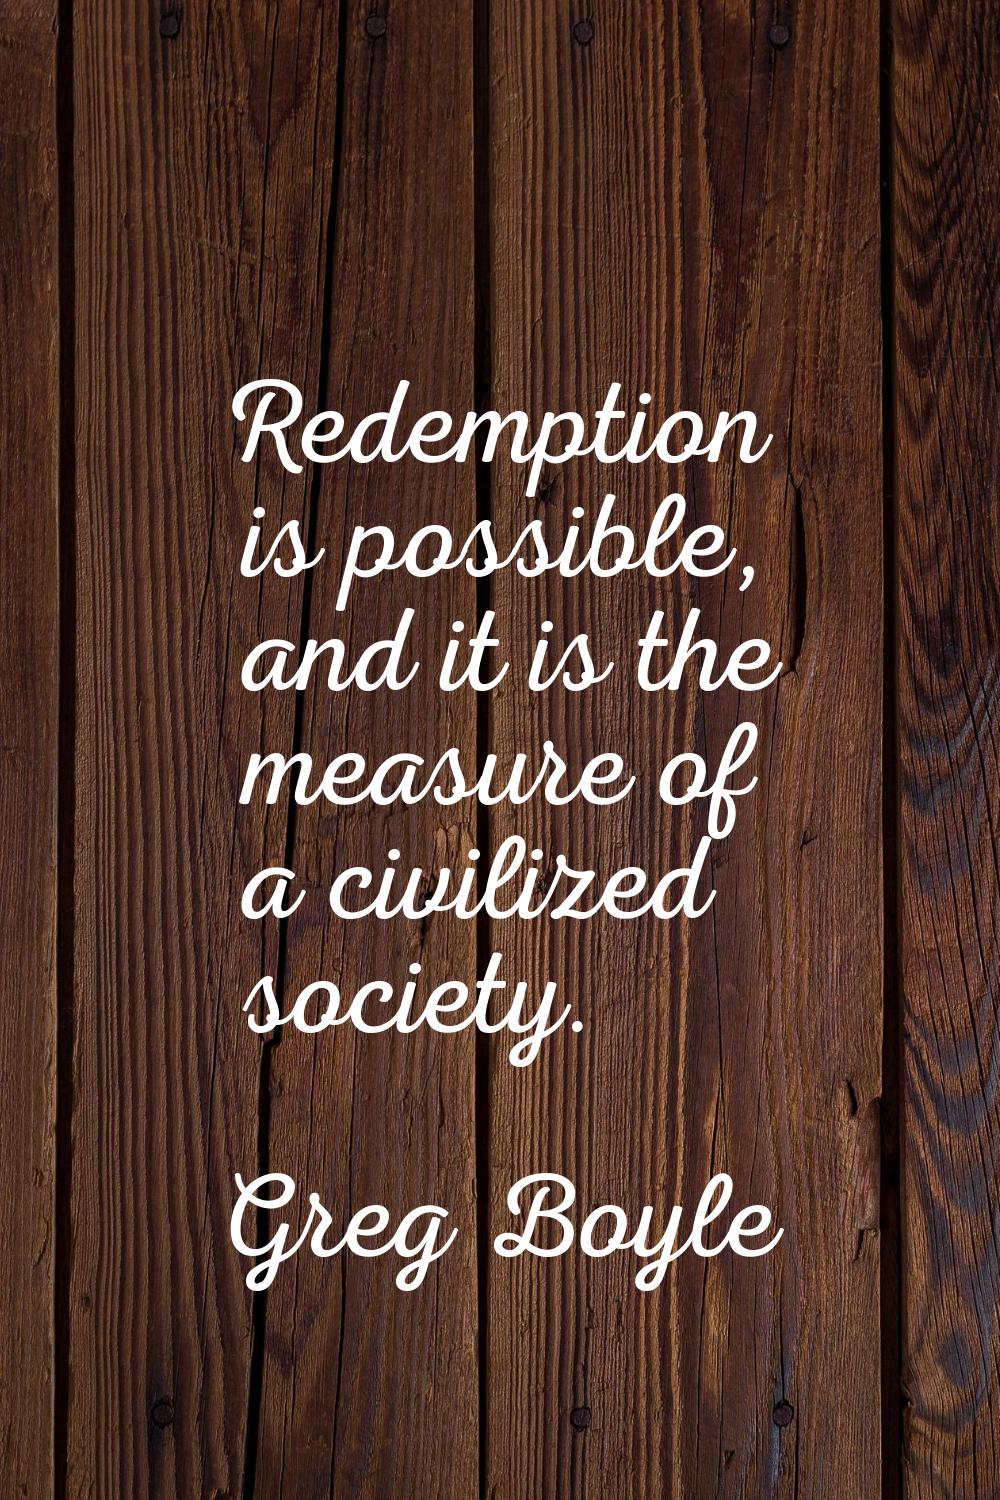 Redemption is possible, and it is the measure of a civilized society.